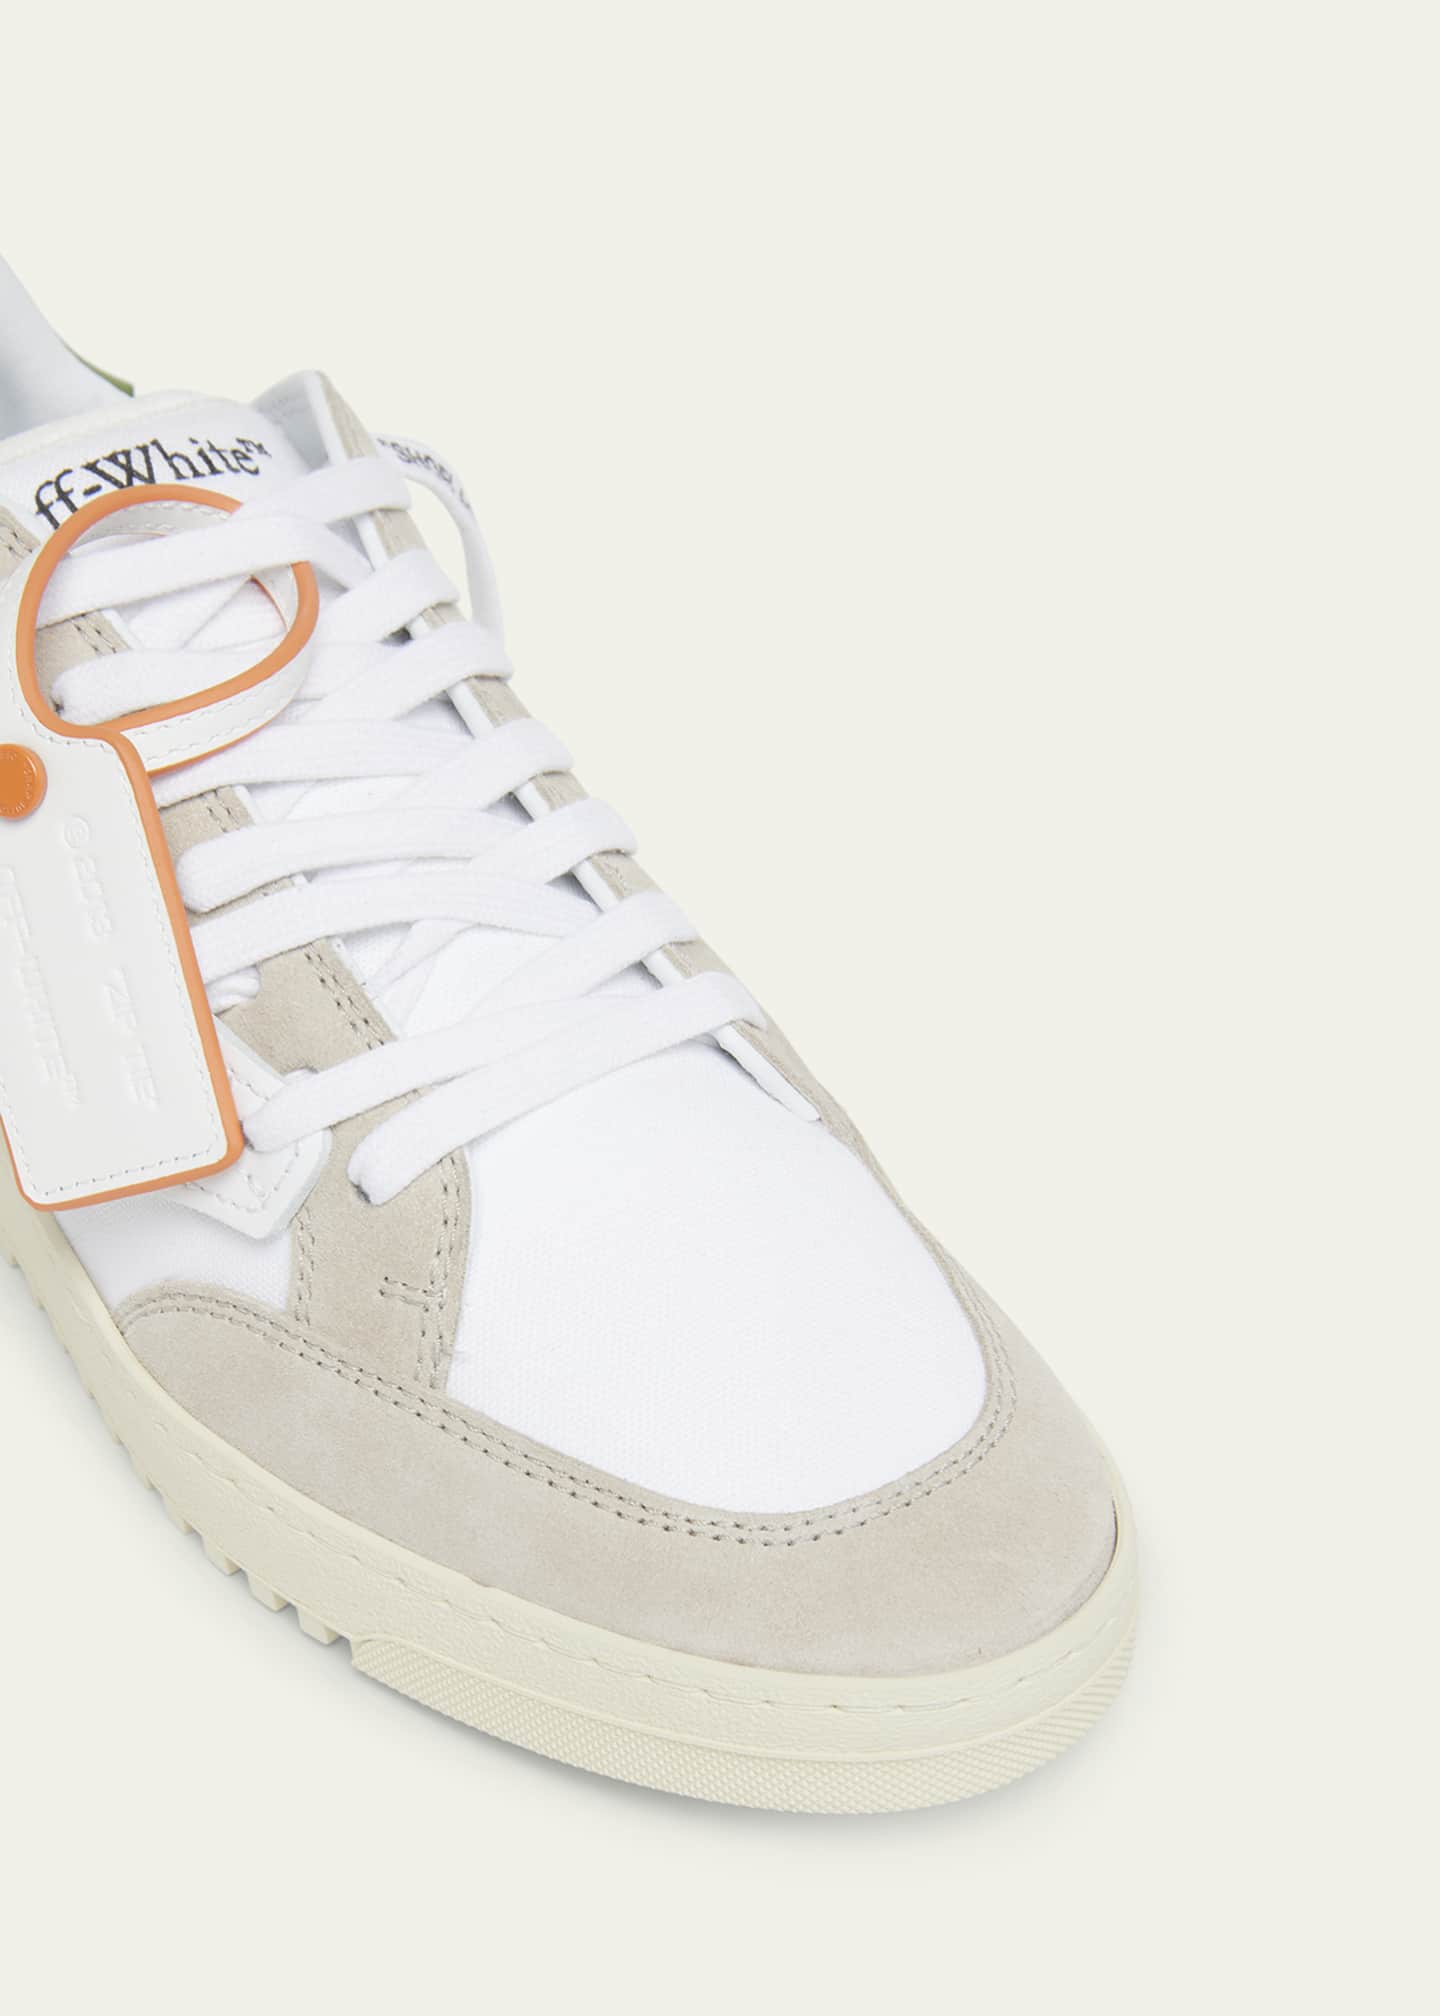 Off-White Men's 5.0 Canvas and Leather Low-Top Sneakers Image 5 of 5